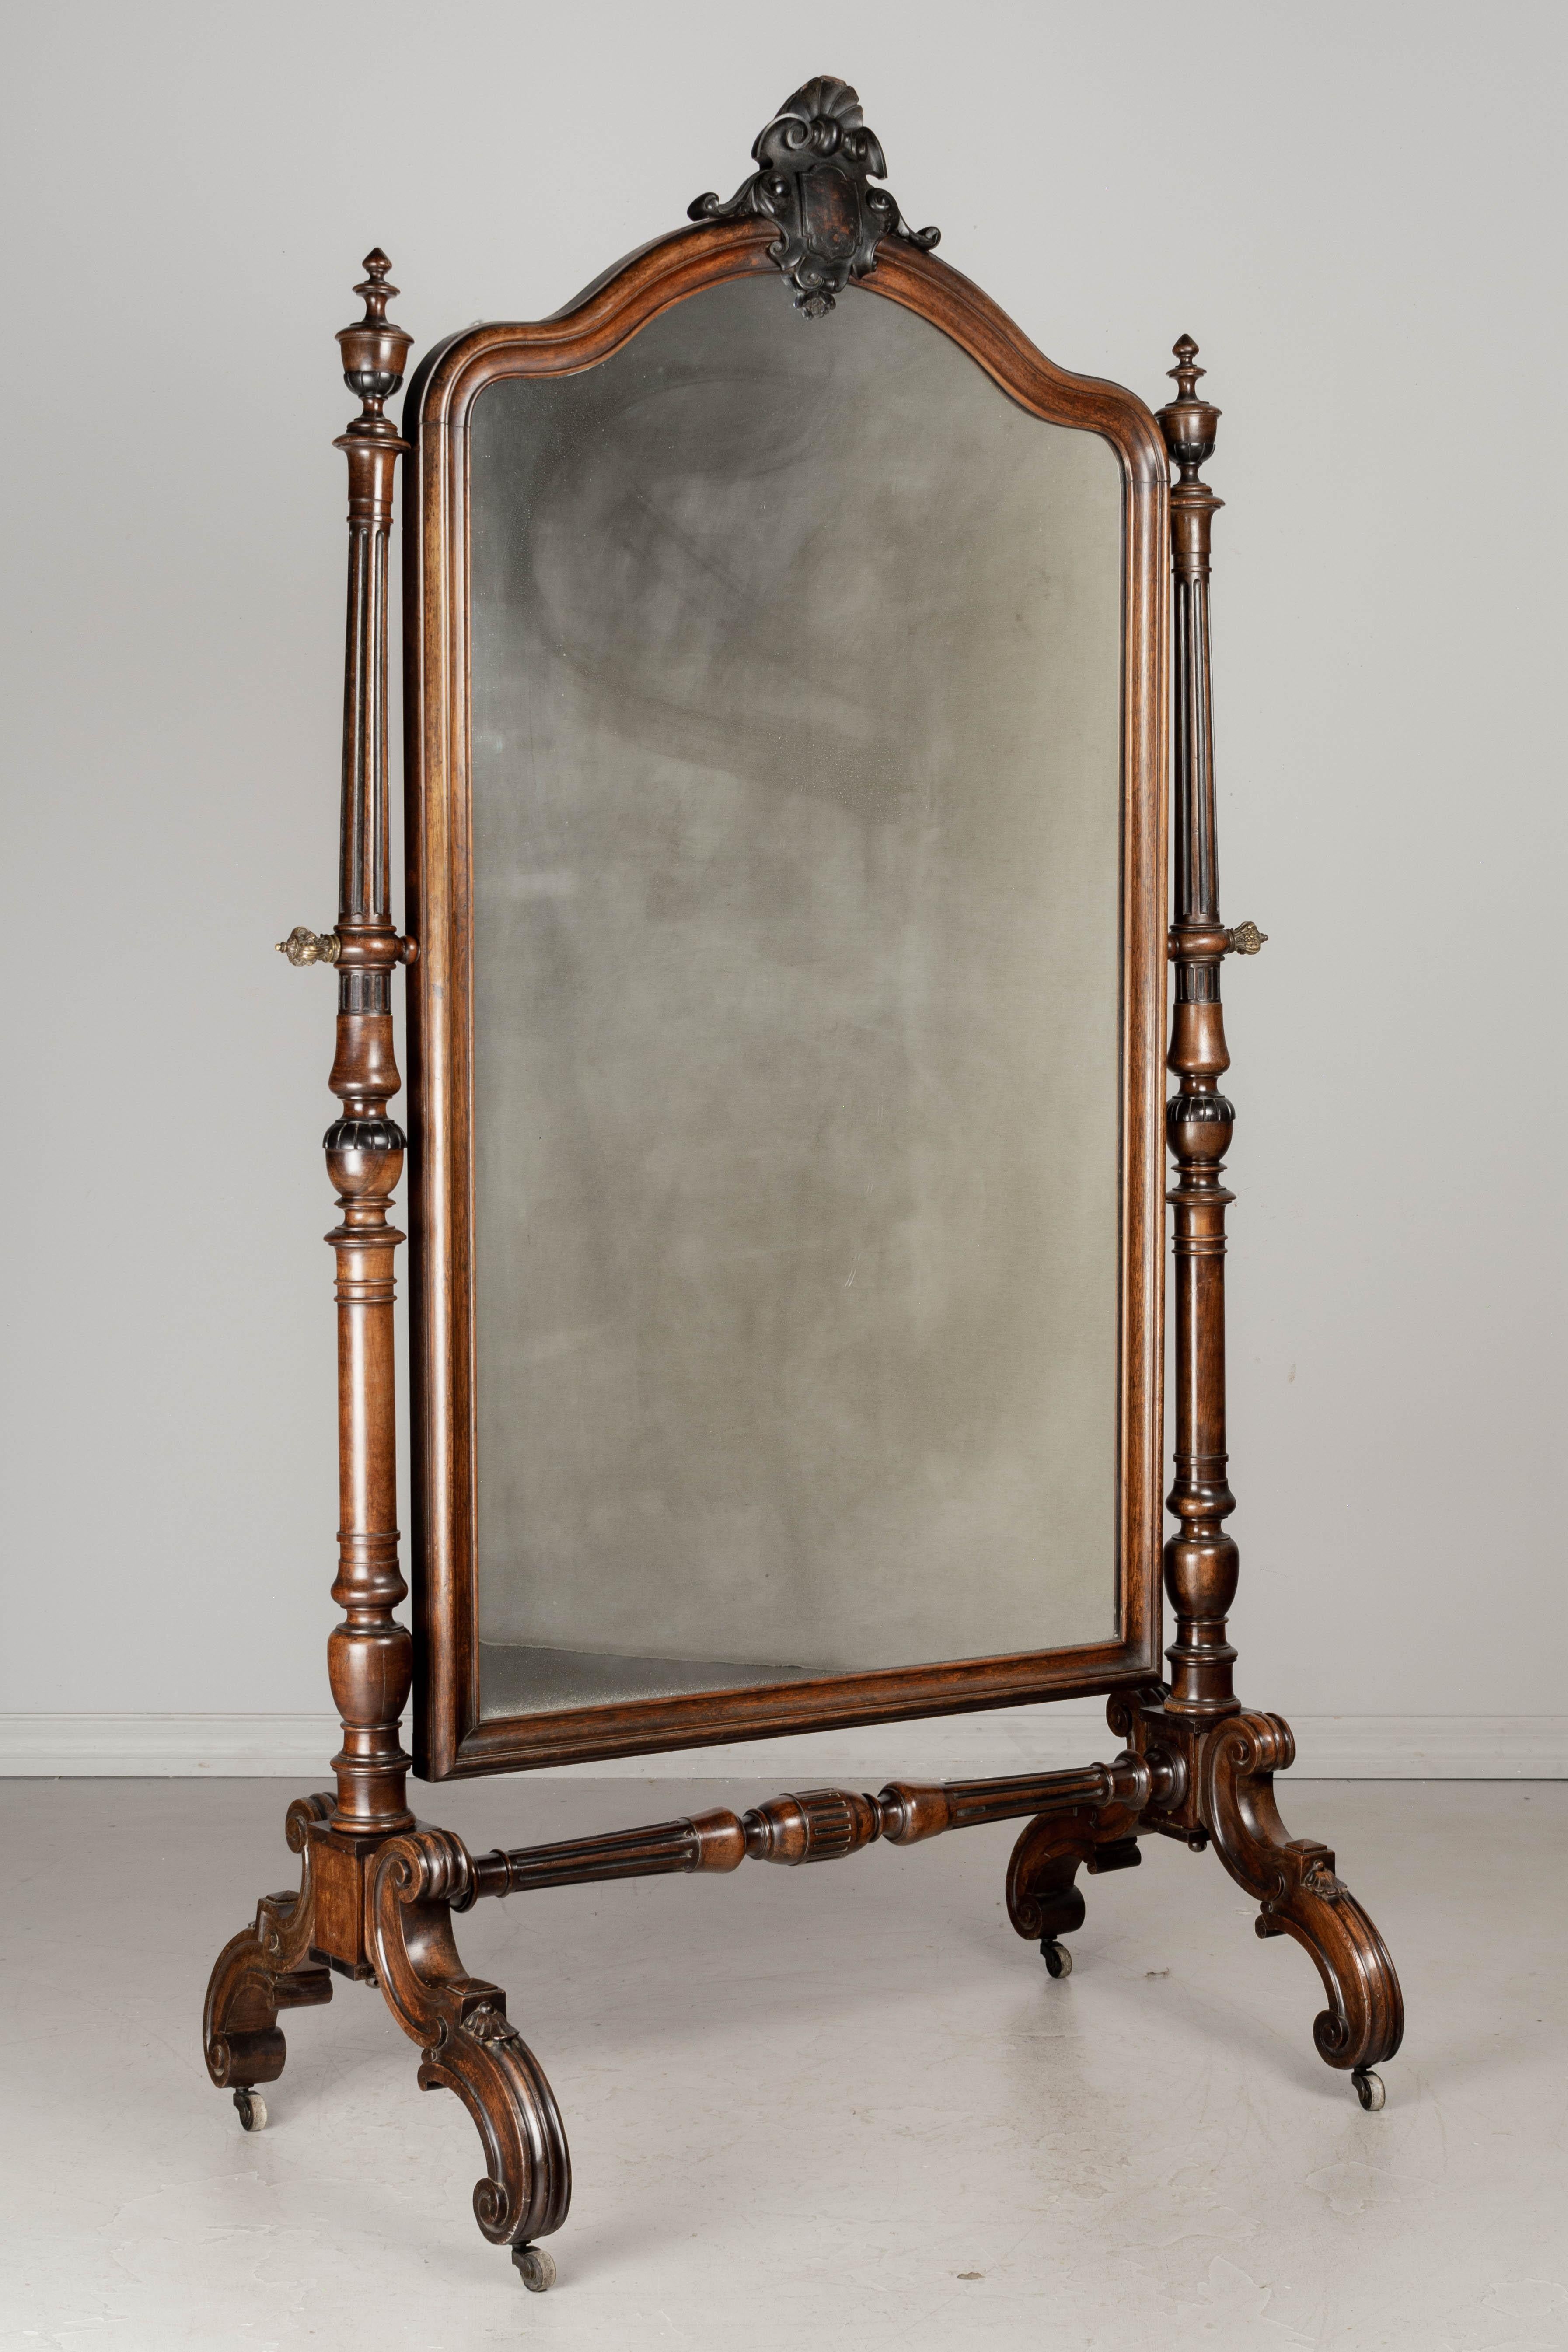 A large 19th century French Napoleon III chevalet, or cheval mirror, made of rosewood with ebonized details. Turned columns and finials and nicely carved details on the scroll form legs and shell form crest at the top. Cast brass knobs and original